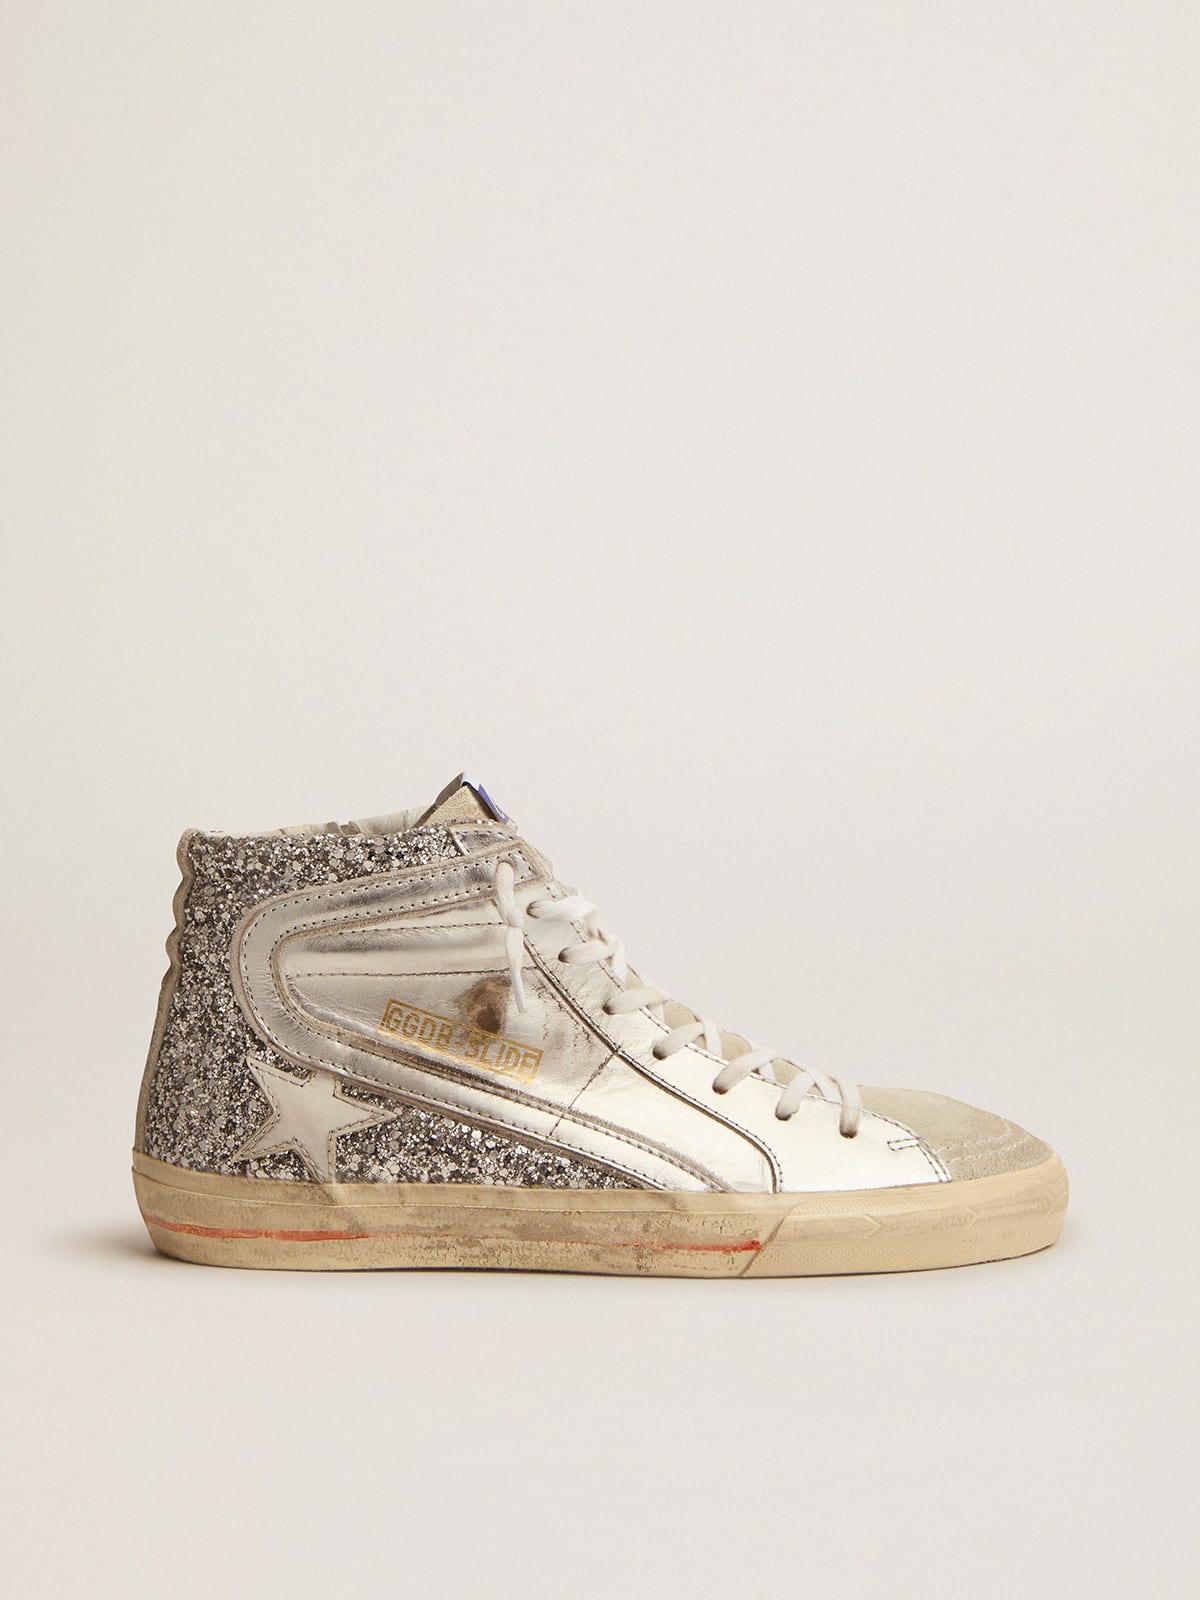 Golden Goose - Slide sneakers with upper in laminated leather and silver glitter in 